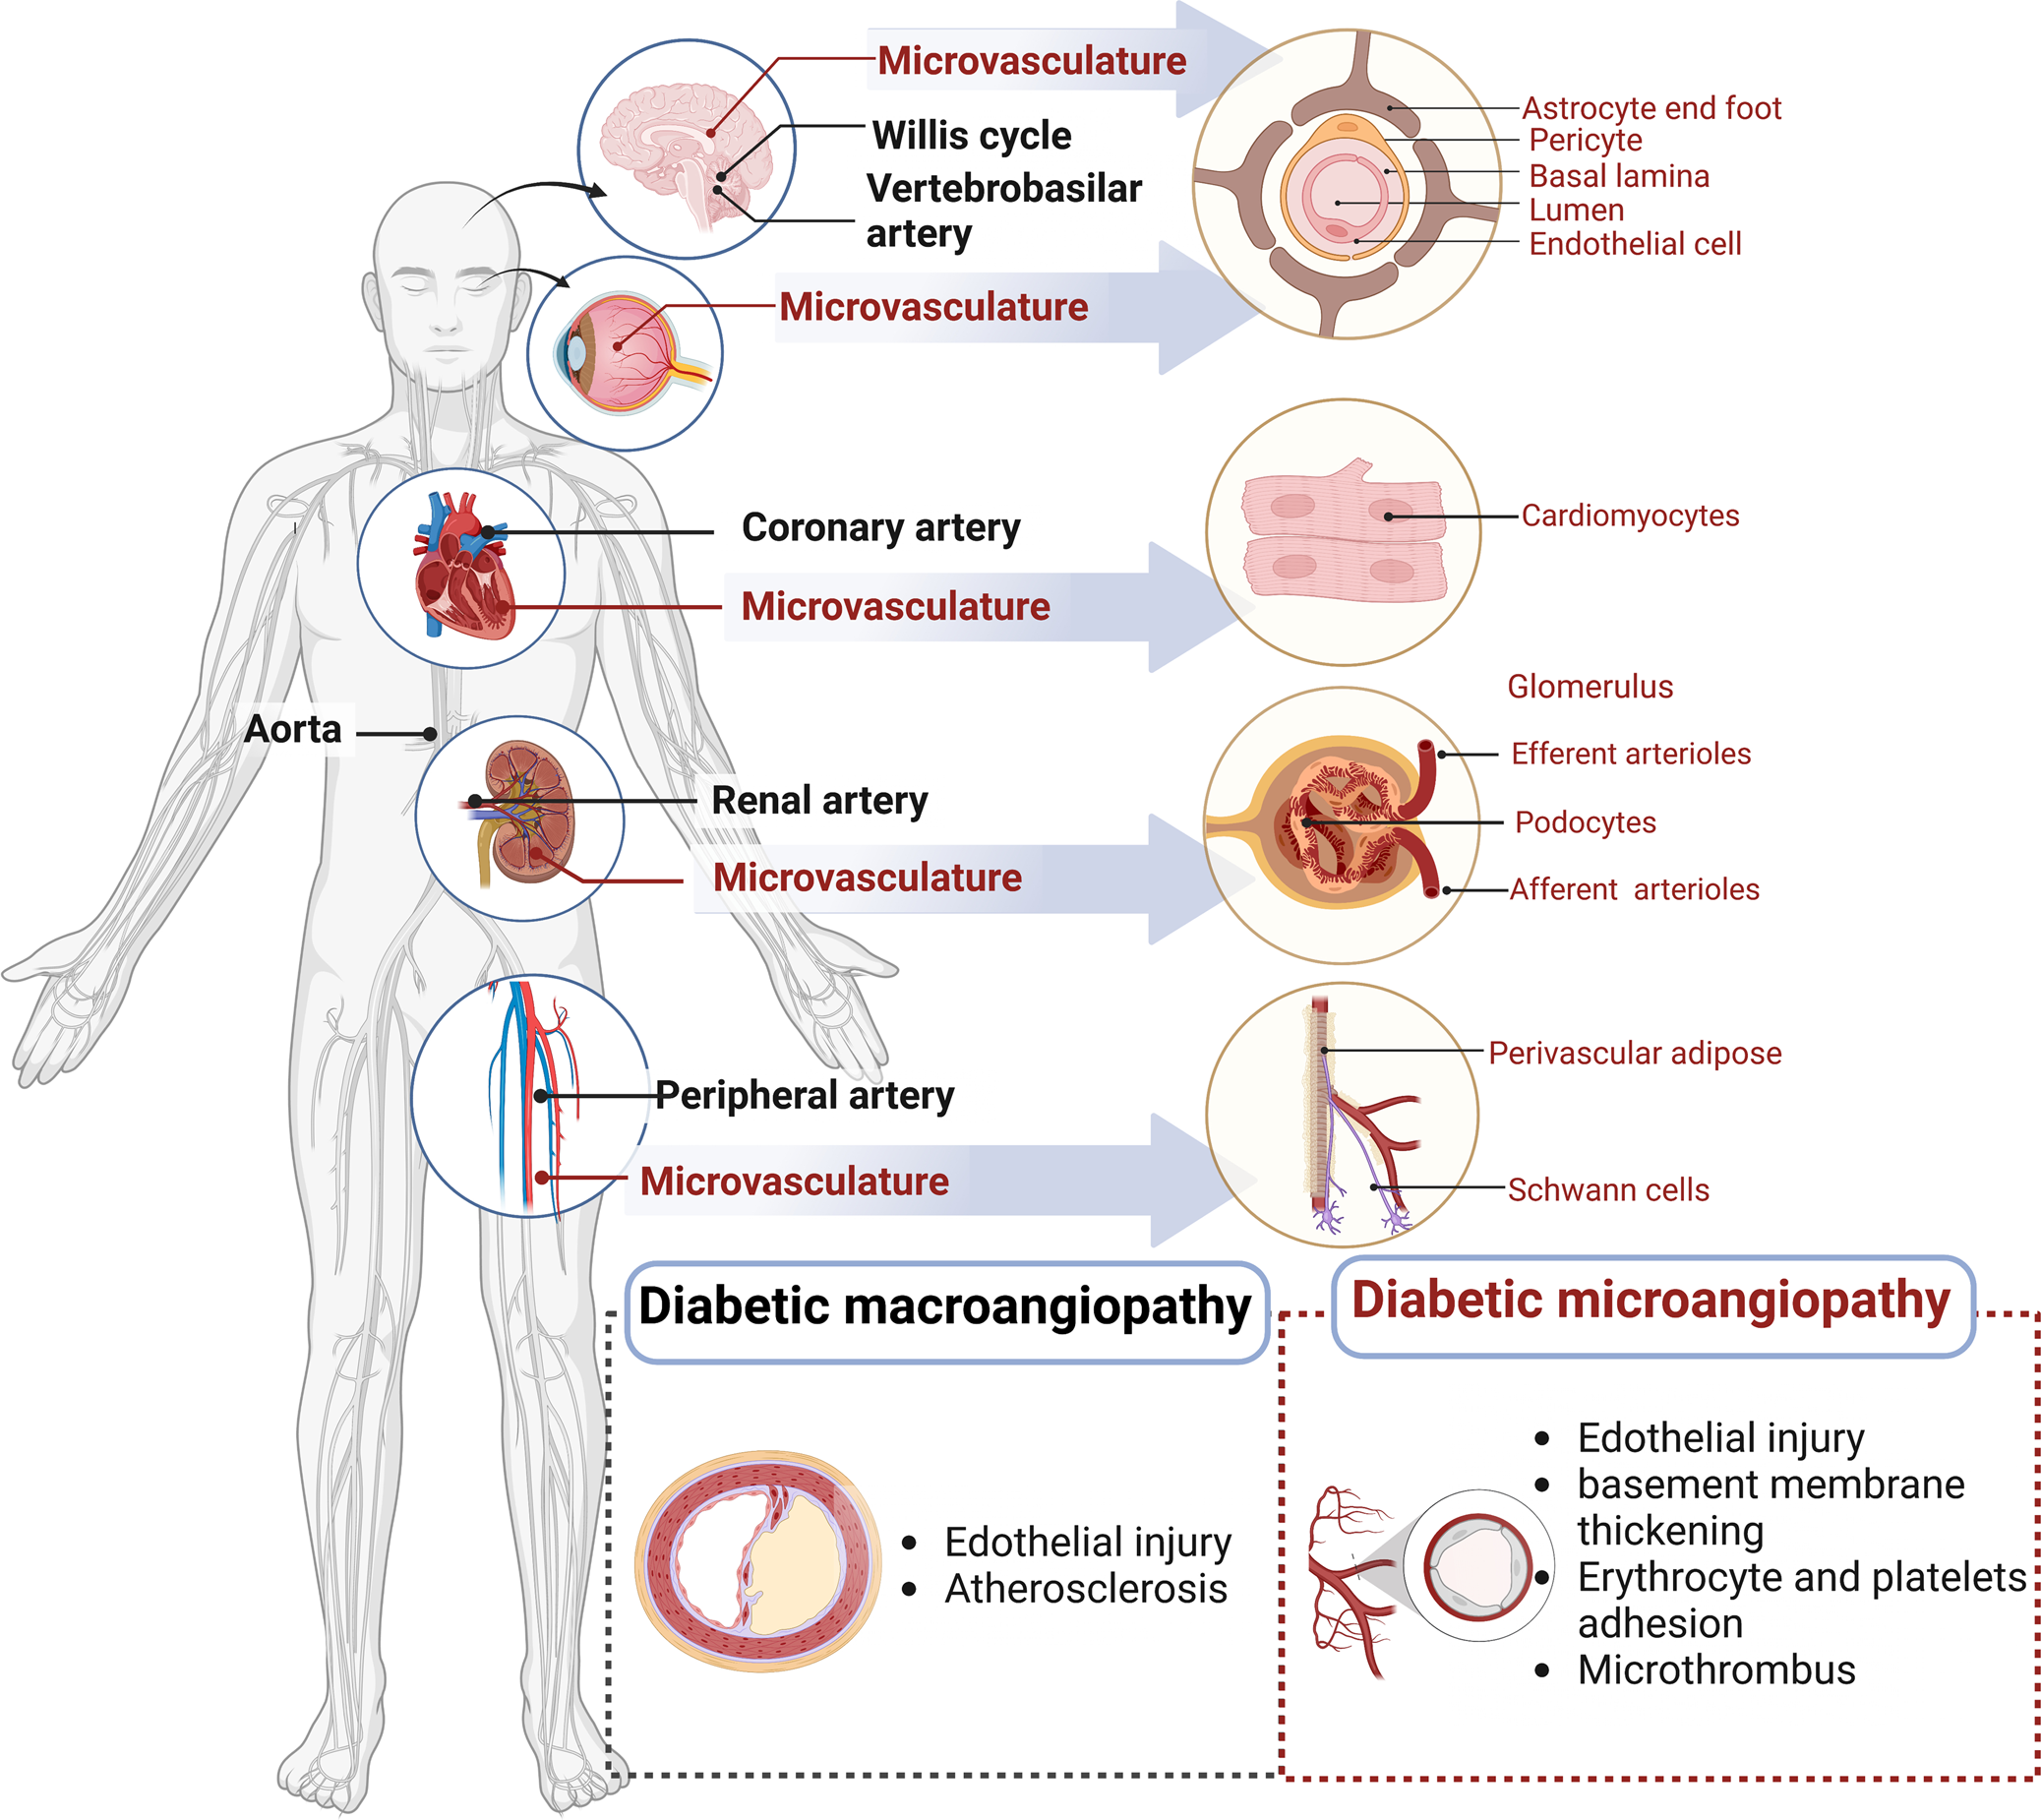 Diabetic vascular diseases: molecular mechanisms and therapeutic strategies  | Signal Transduction and Targeted Therapy